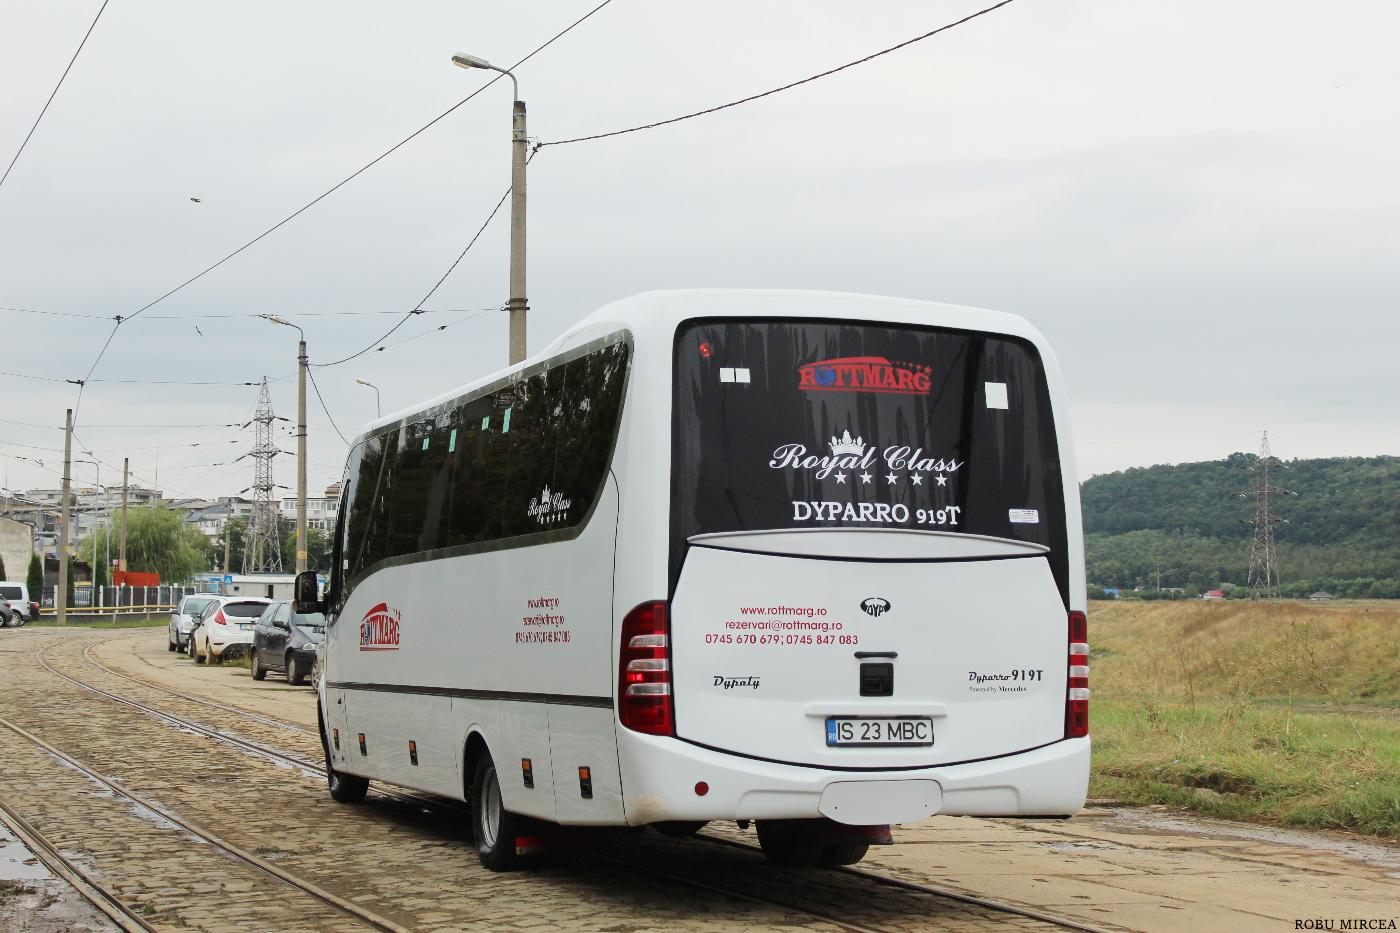 Iaşi, Dypety Dyparro 919T Nr. IS 23 MBC